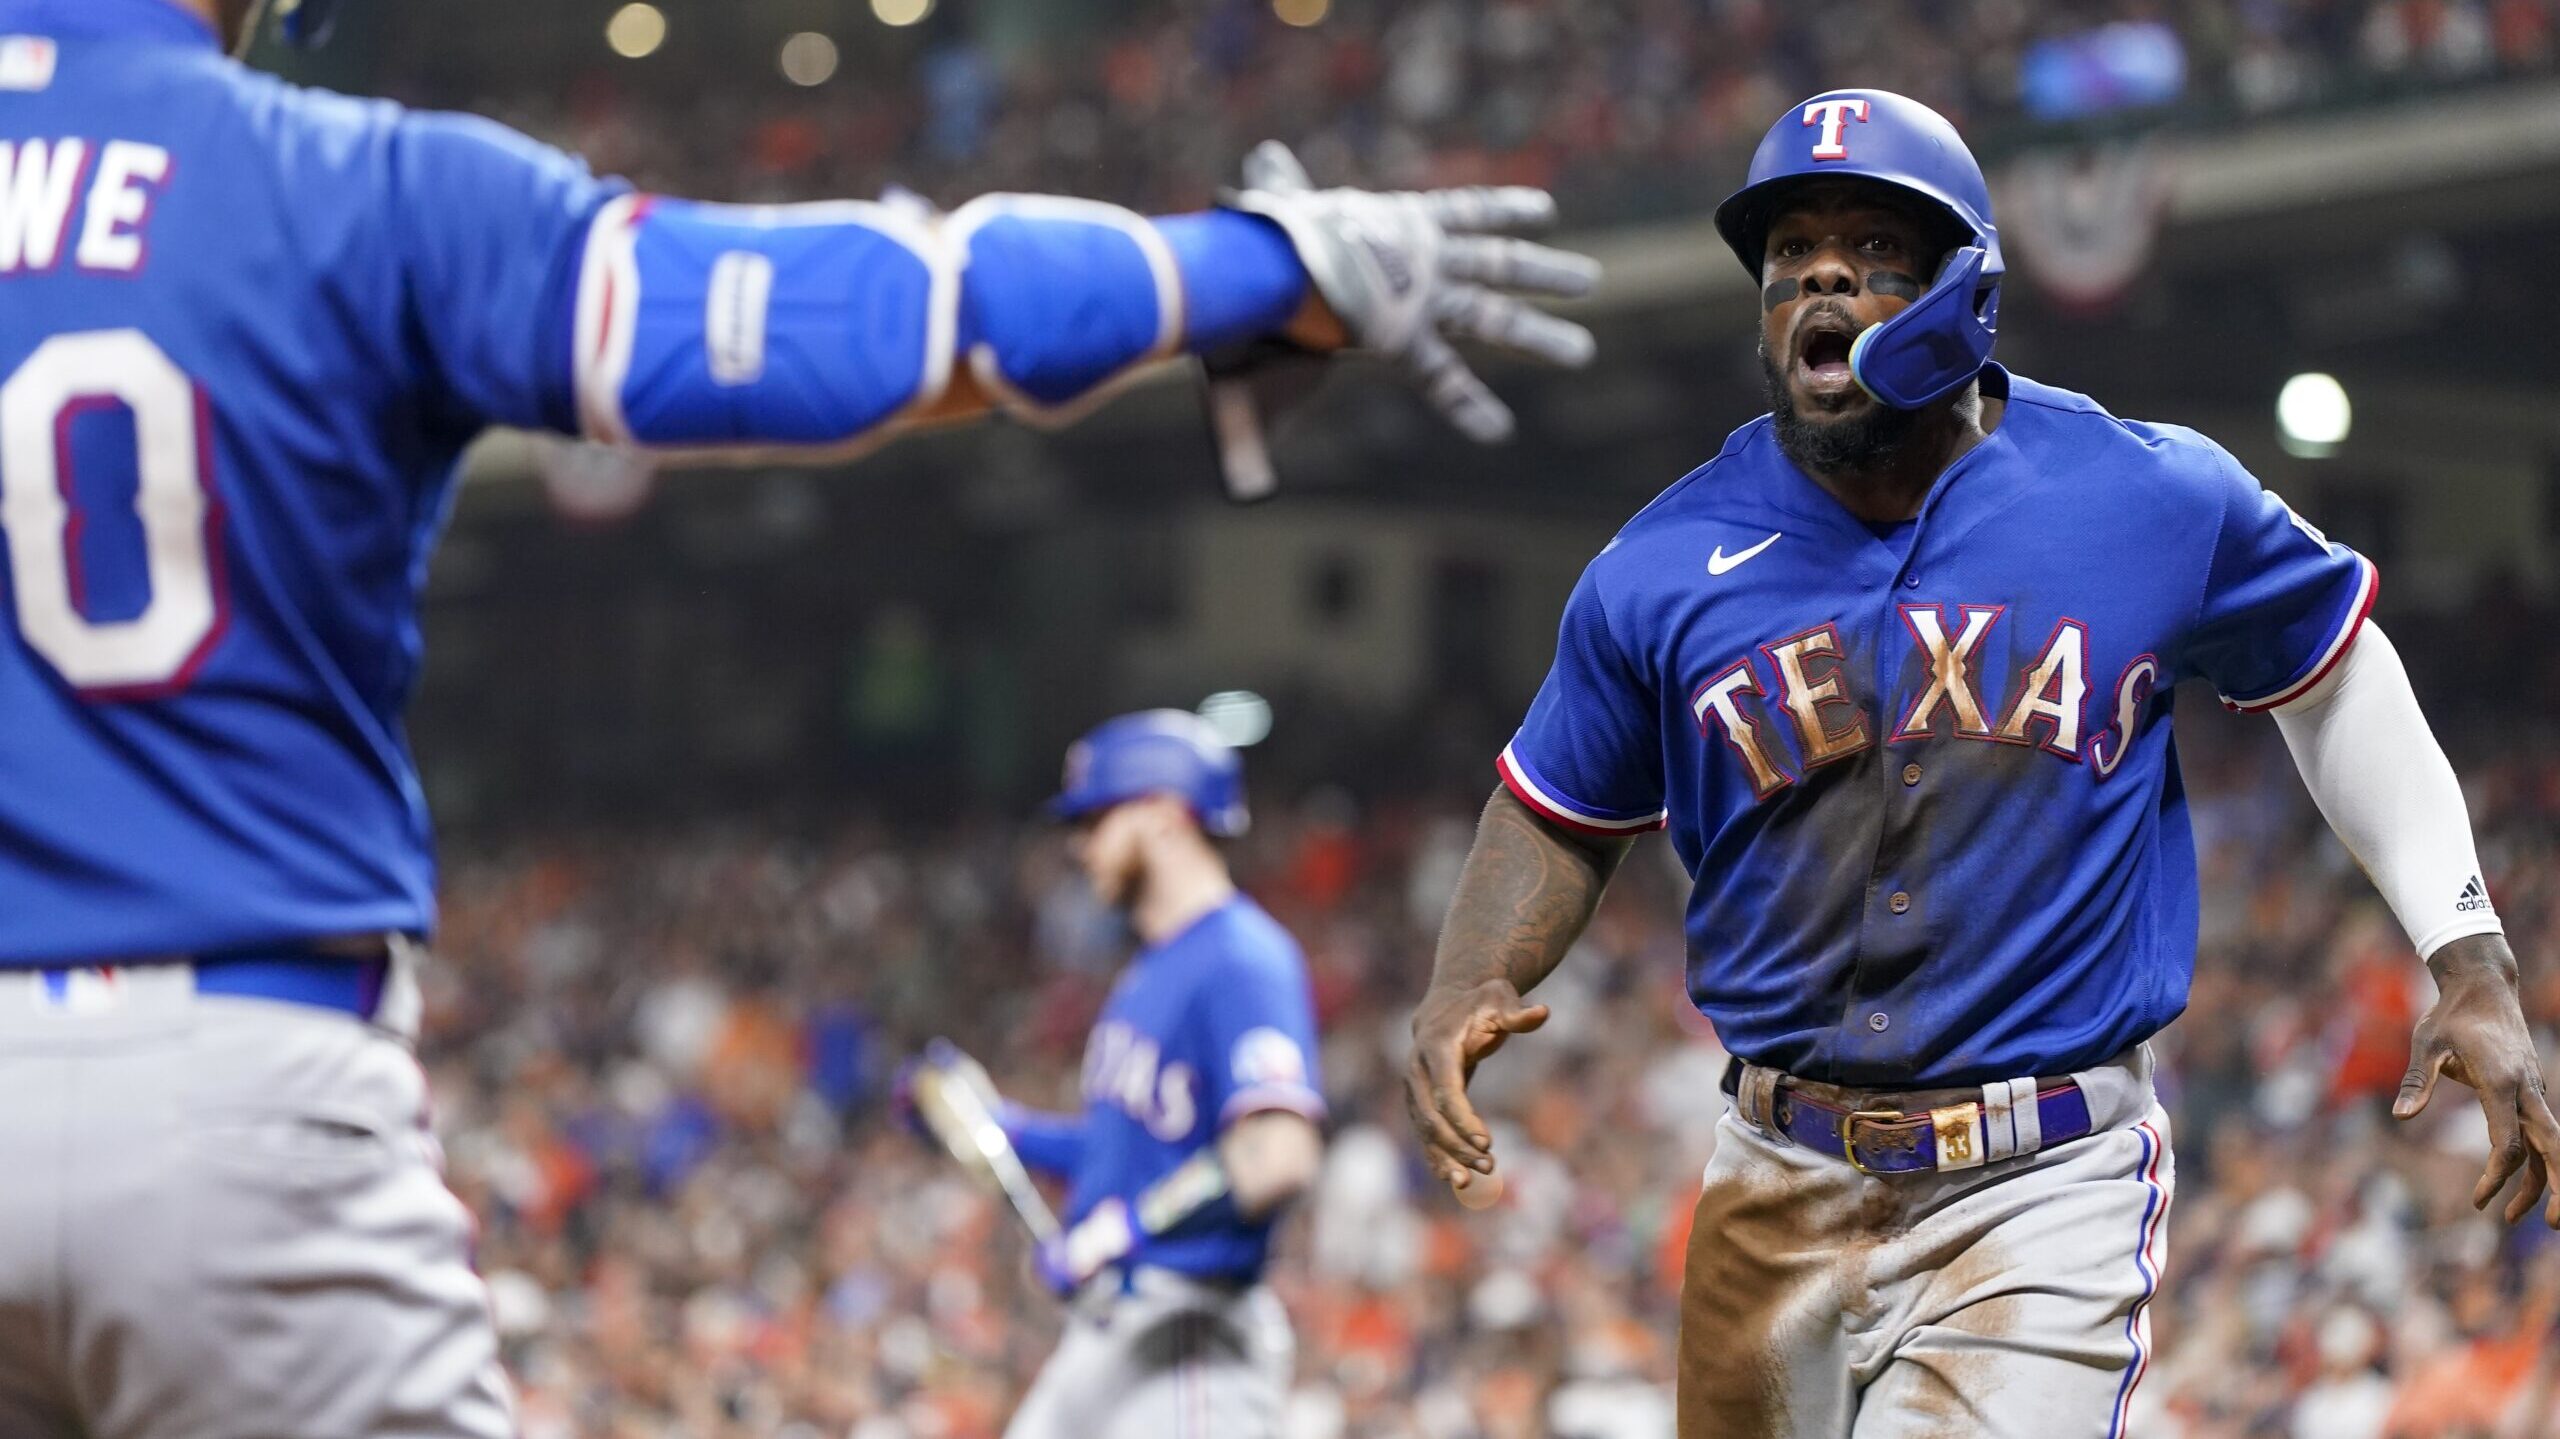 Rangers headed to World Series, rout Astros in ALCS Game 7